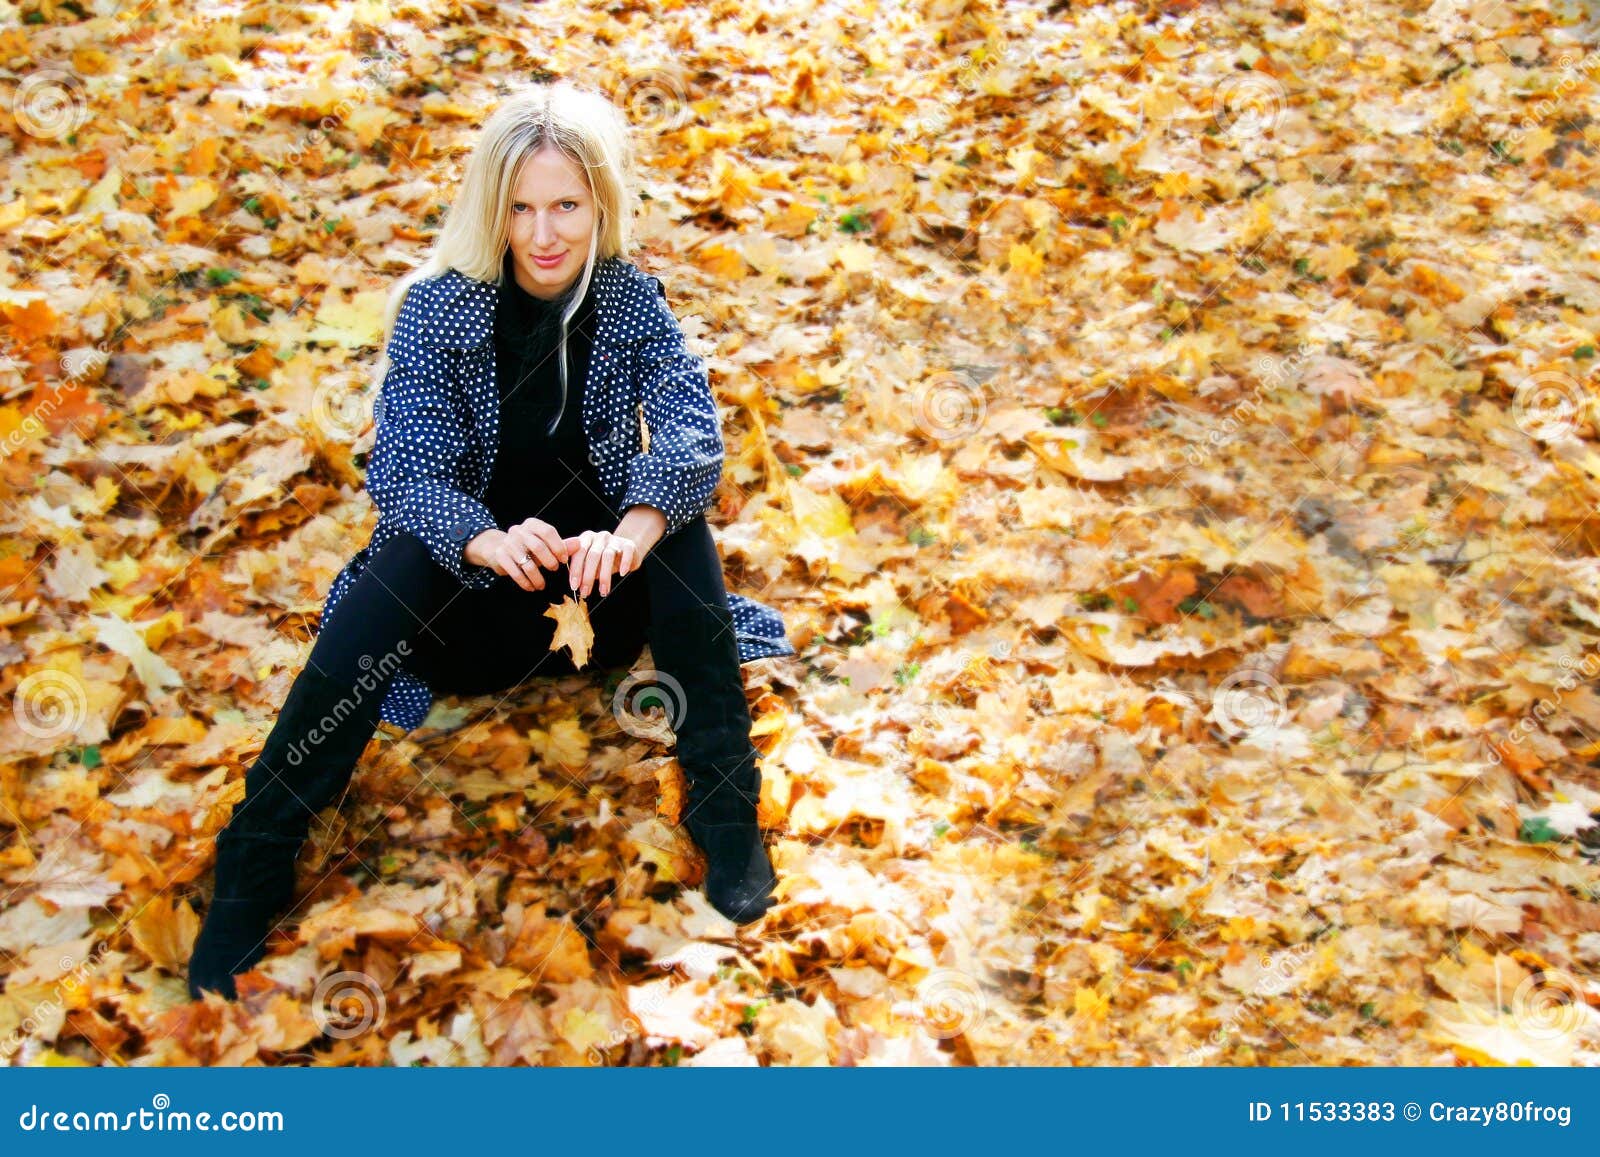 Beautiful Woman Sitting on Autumn Leaves Stock Image - Image of natural ...